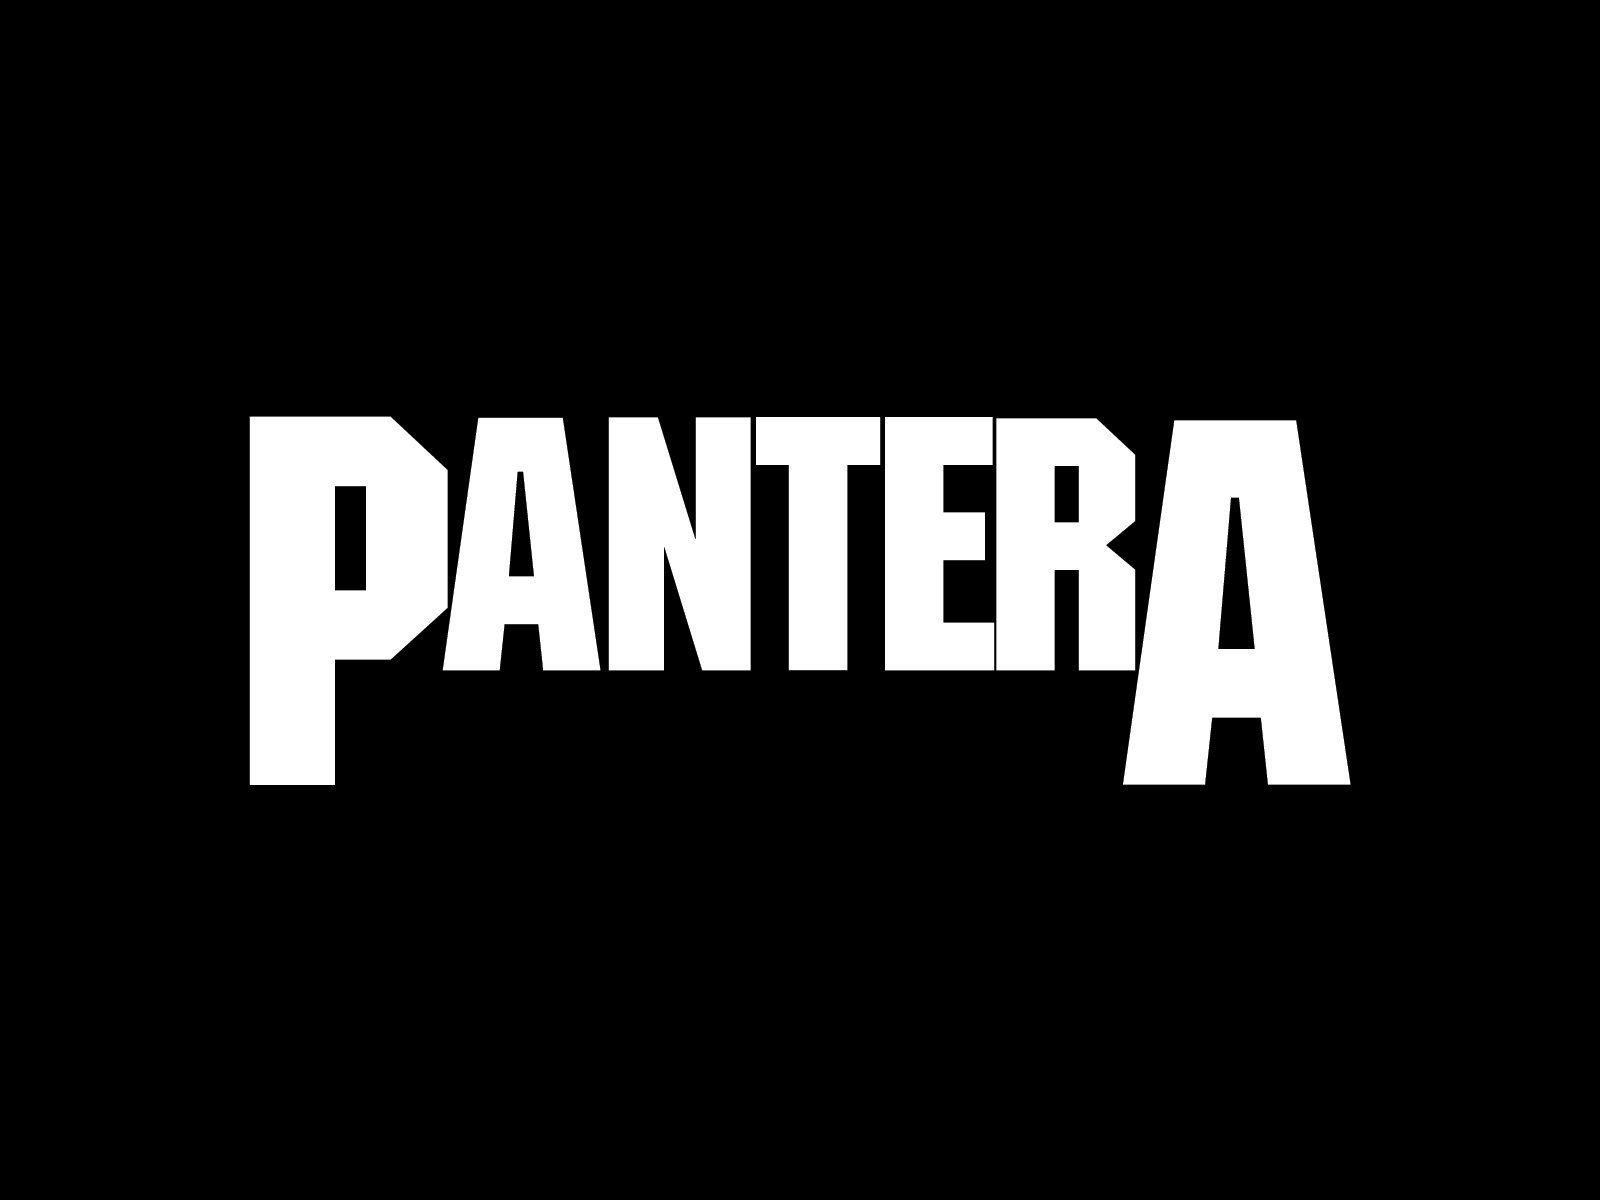 Wall Poster Pantera POSTER PRINT ON 36X24 INCHES Photographic Paper  Art   Paintings posters in India  Buy art film design movie music nature  and educational paintingswallpapers at Flipkartcom